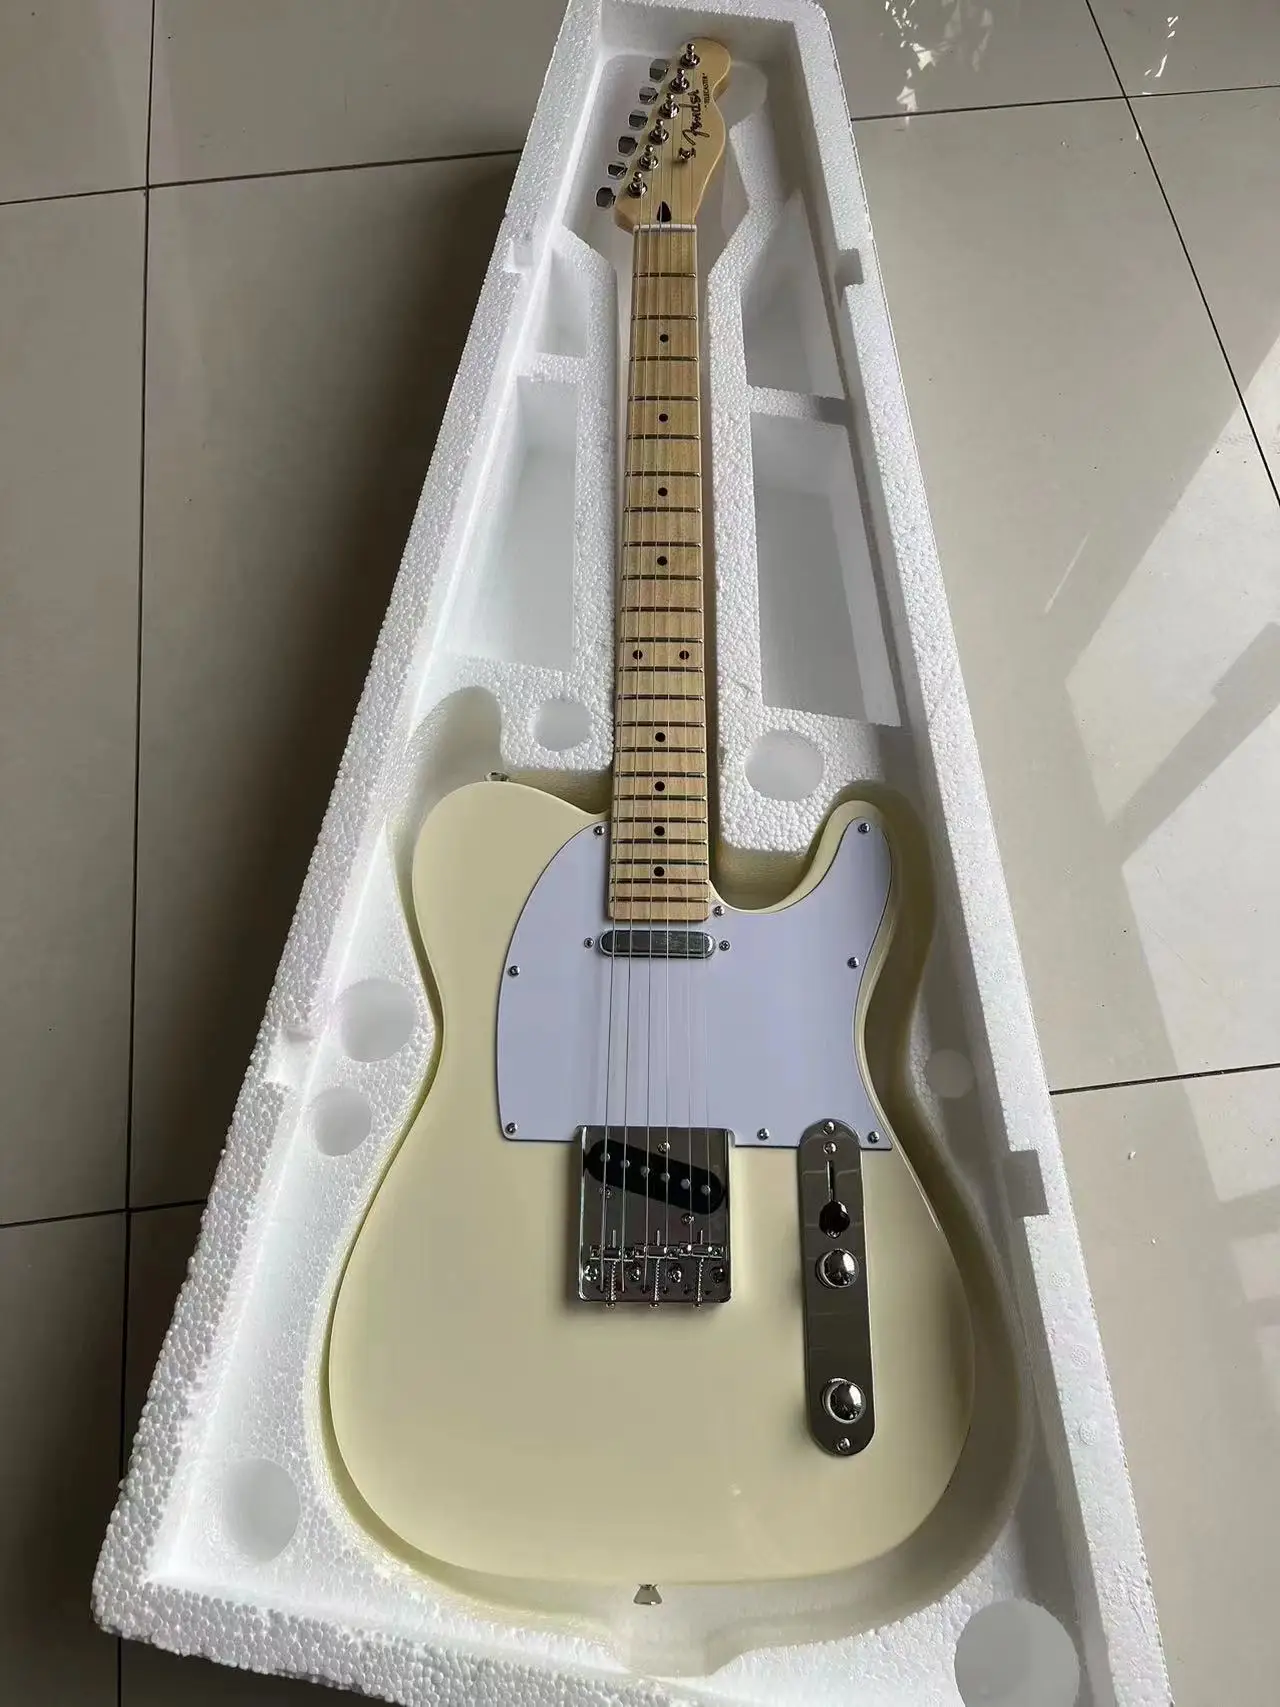 

Hot Tele electric guitar high quality basswood Body maple neck custom 6 string Guitars telecast-er style real photos FBHSNBSG